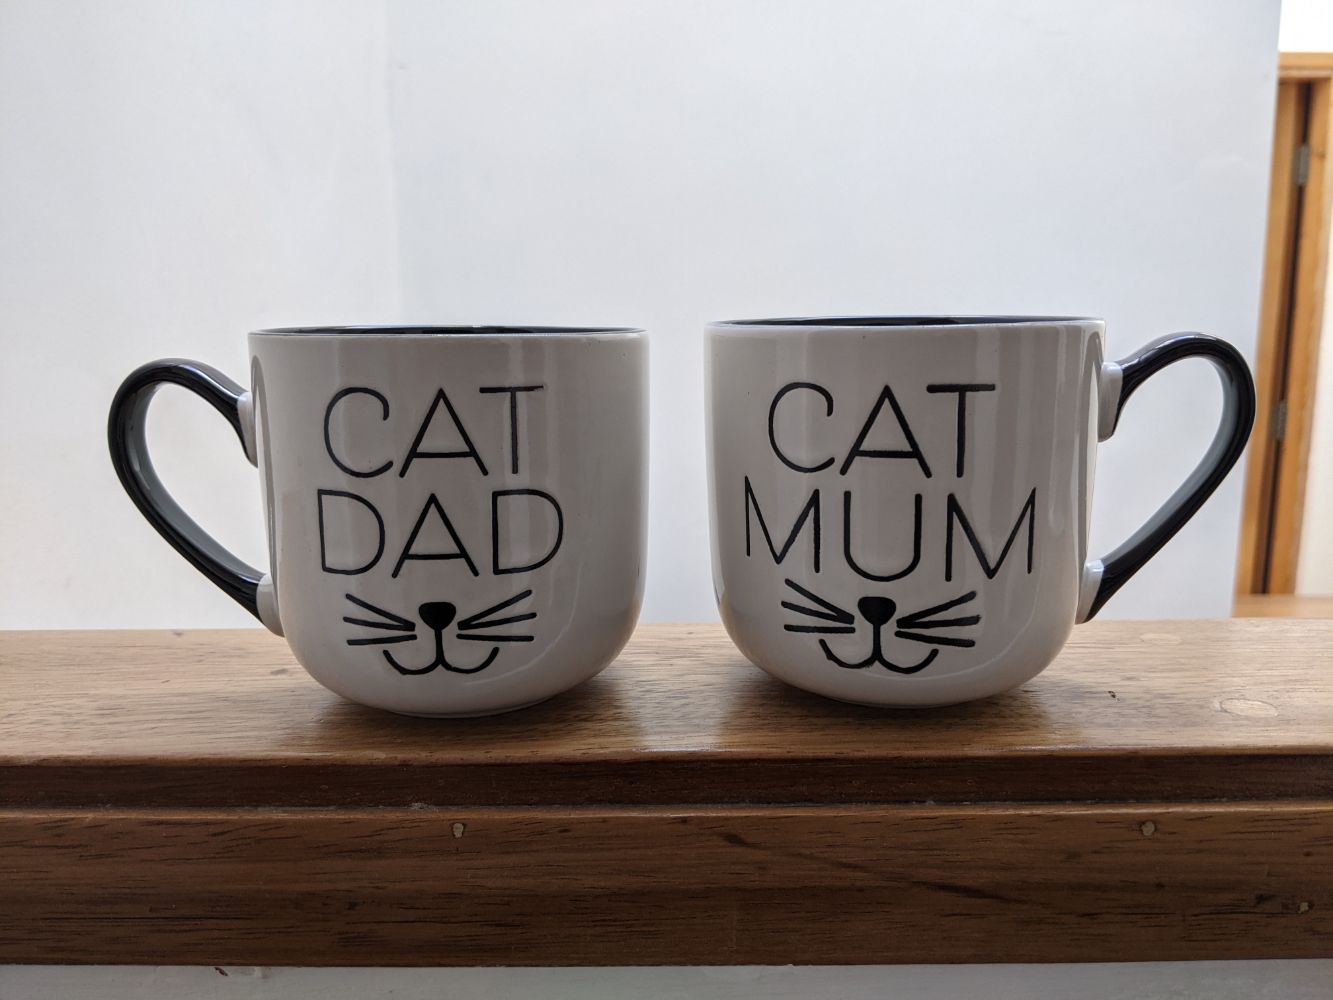 Two mugs sitting on the side, one with "cat dad" and one with "cat mum" and each with a smiling cat mouth 